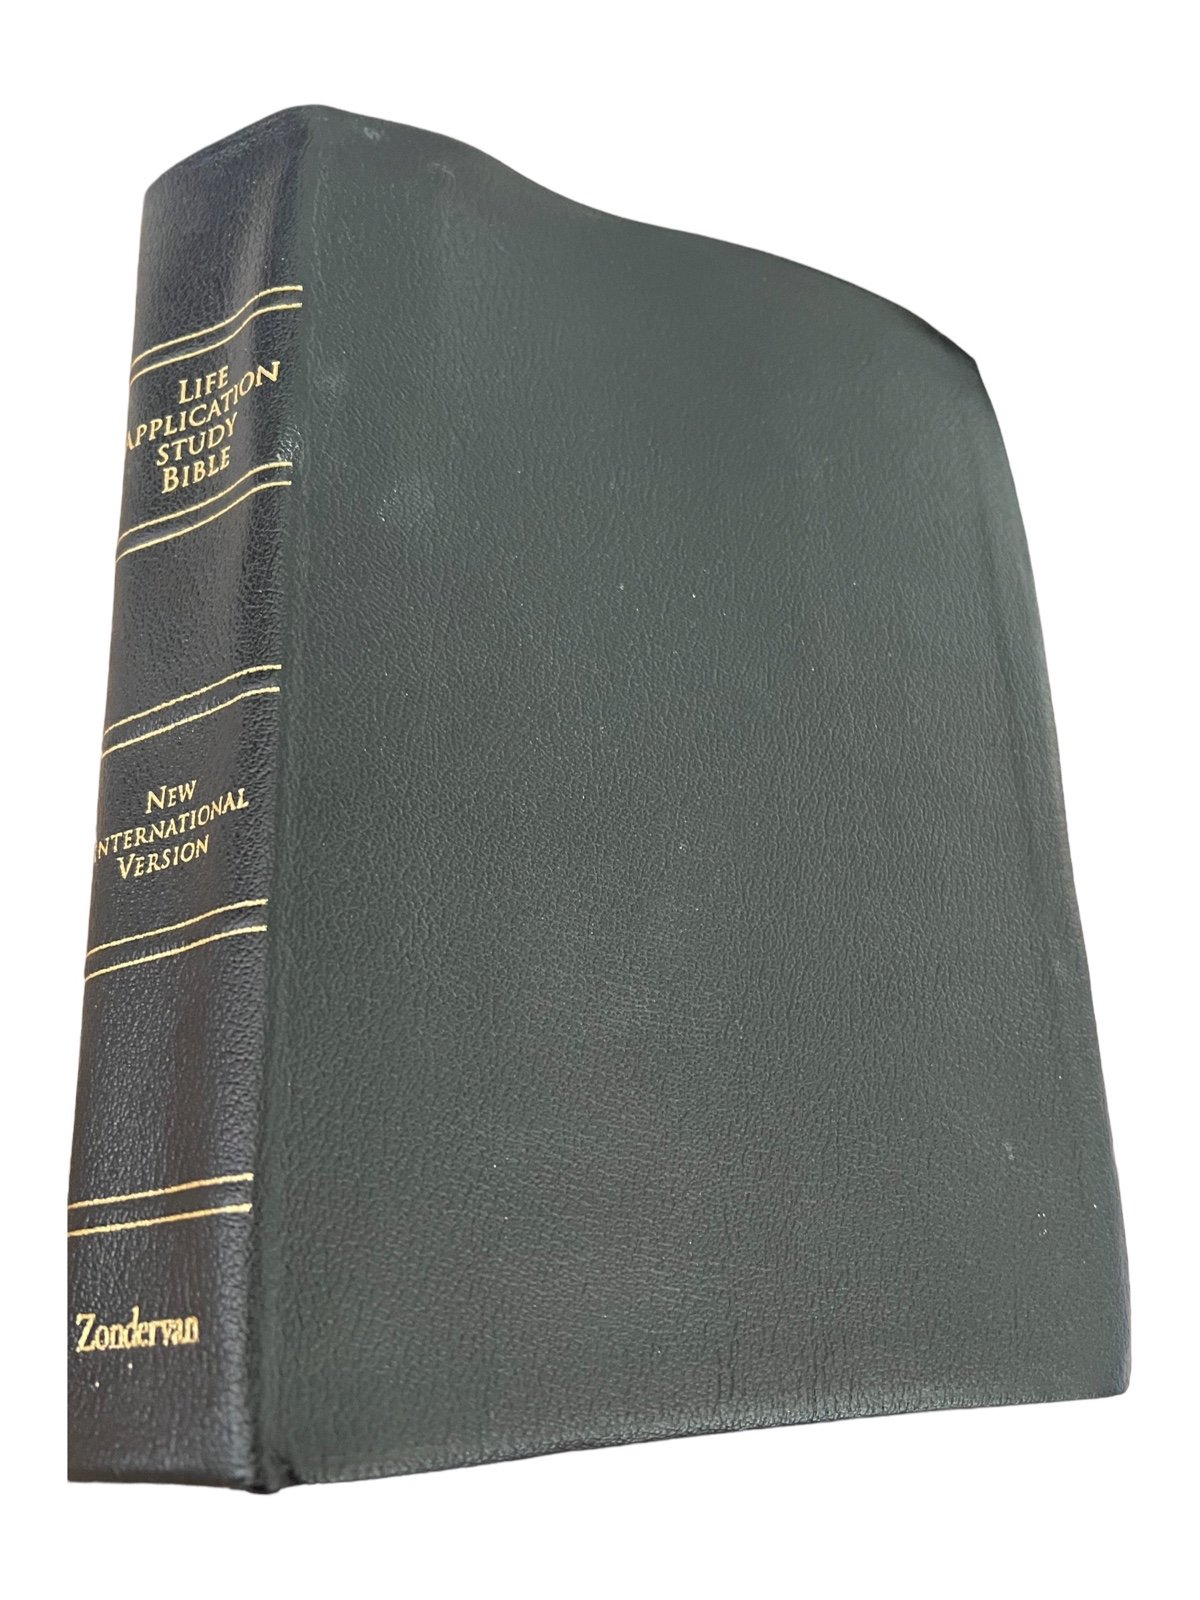 The Life Application Bible by Zondervan Staff (1991, Hardcover) Leather Bound. oYhhLsS9E